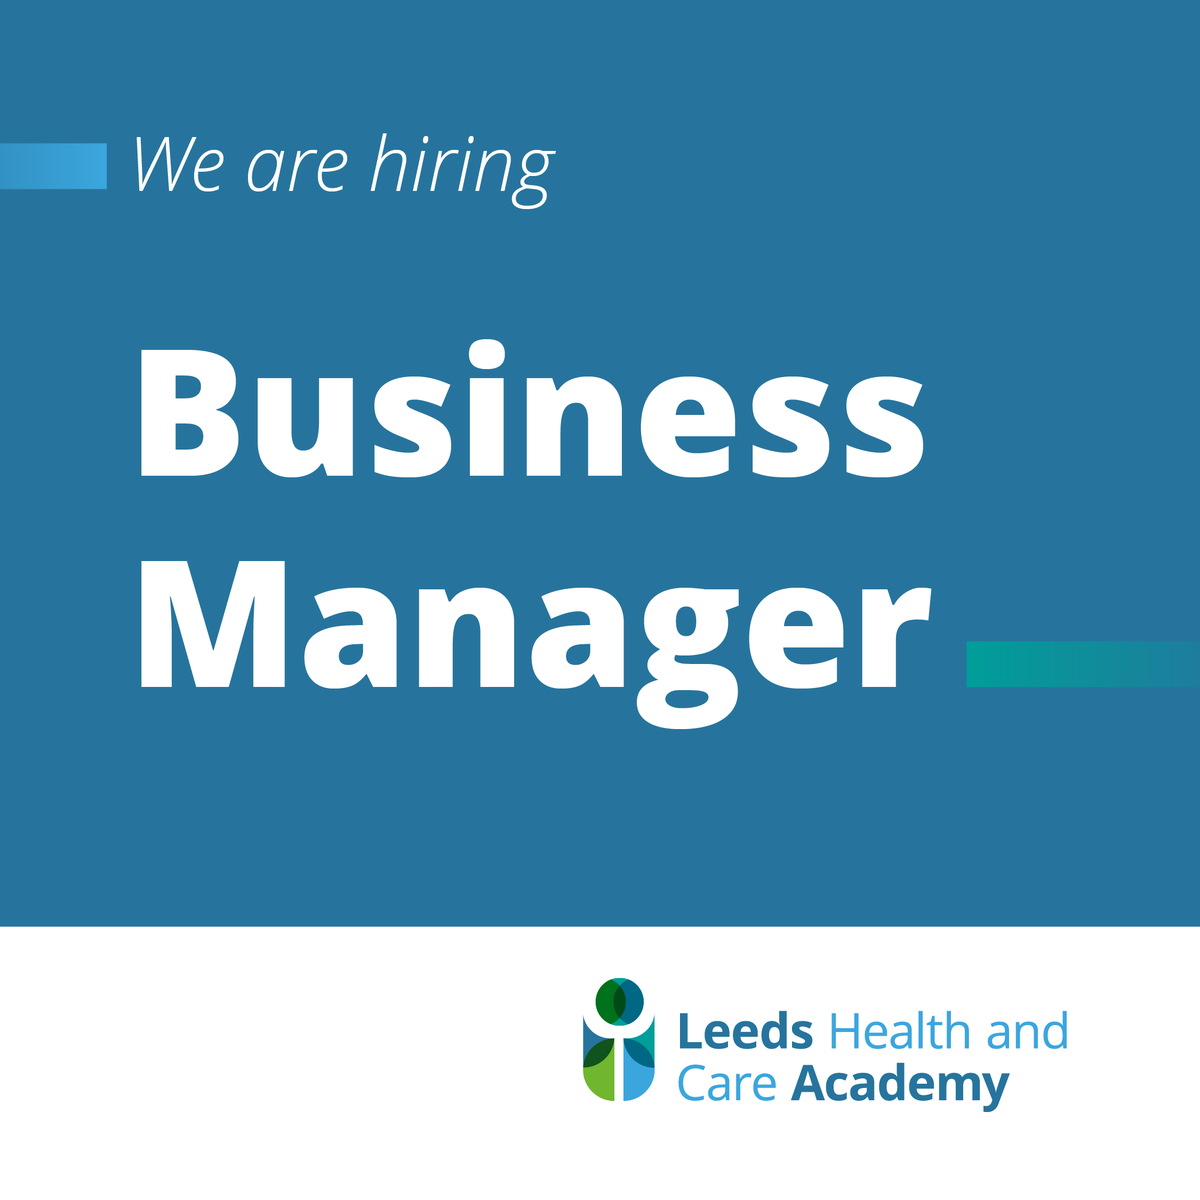 Applications for the Business Manager role close tomorrow!⏰ This pivotal role focuses on effective business management, relationship building, strategic growth and development for the Academy. Read more about the role & how to apply, here: leedshealthandcareacademy.org/news/job-vacan…